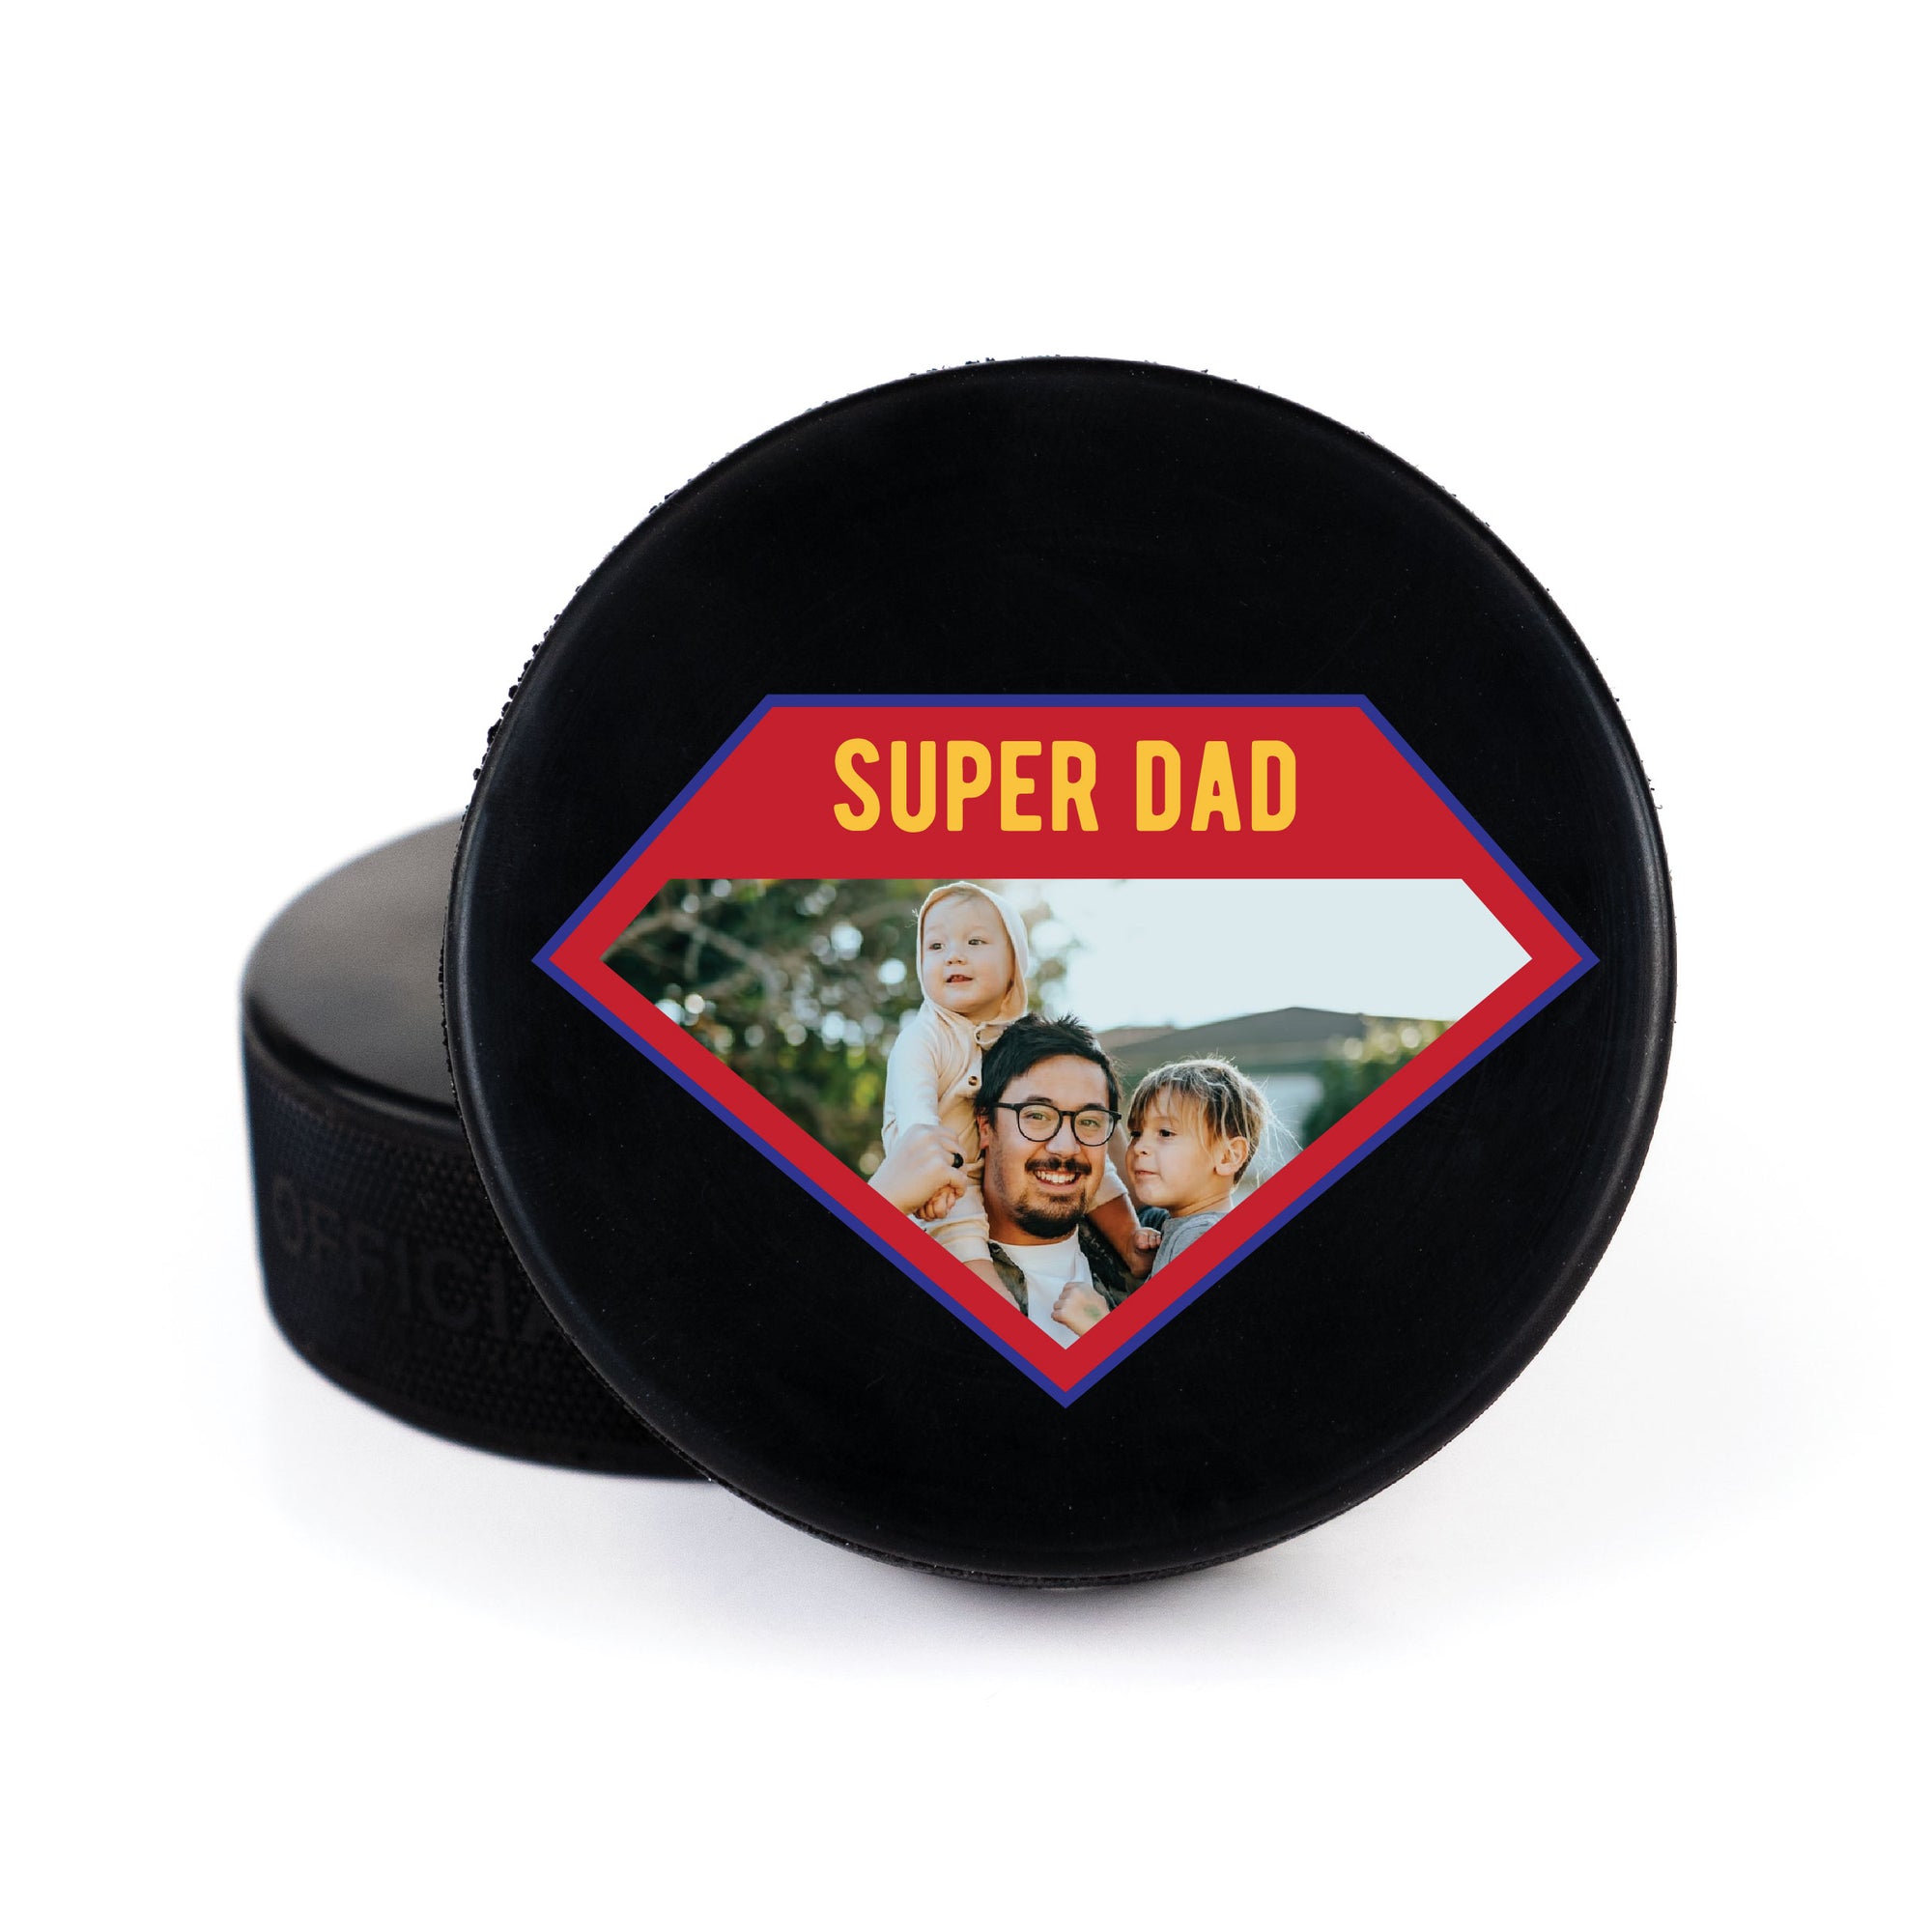 Printed Puck with Super Dad Photo Design